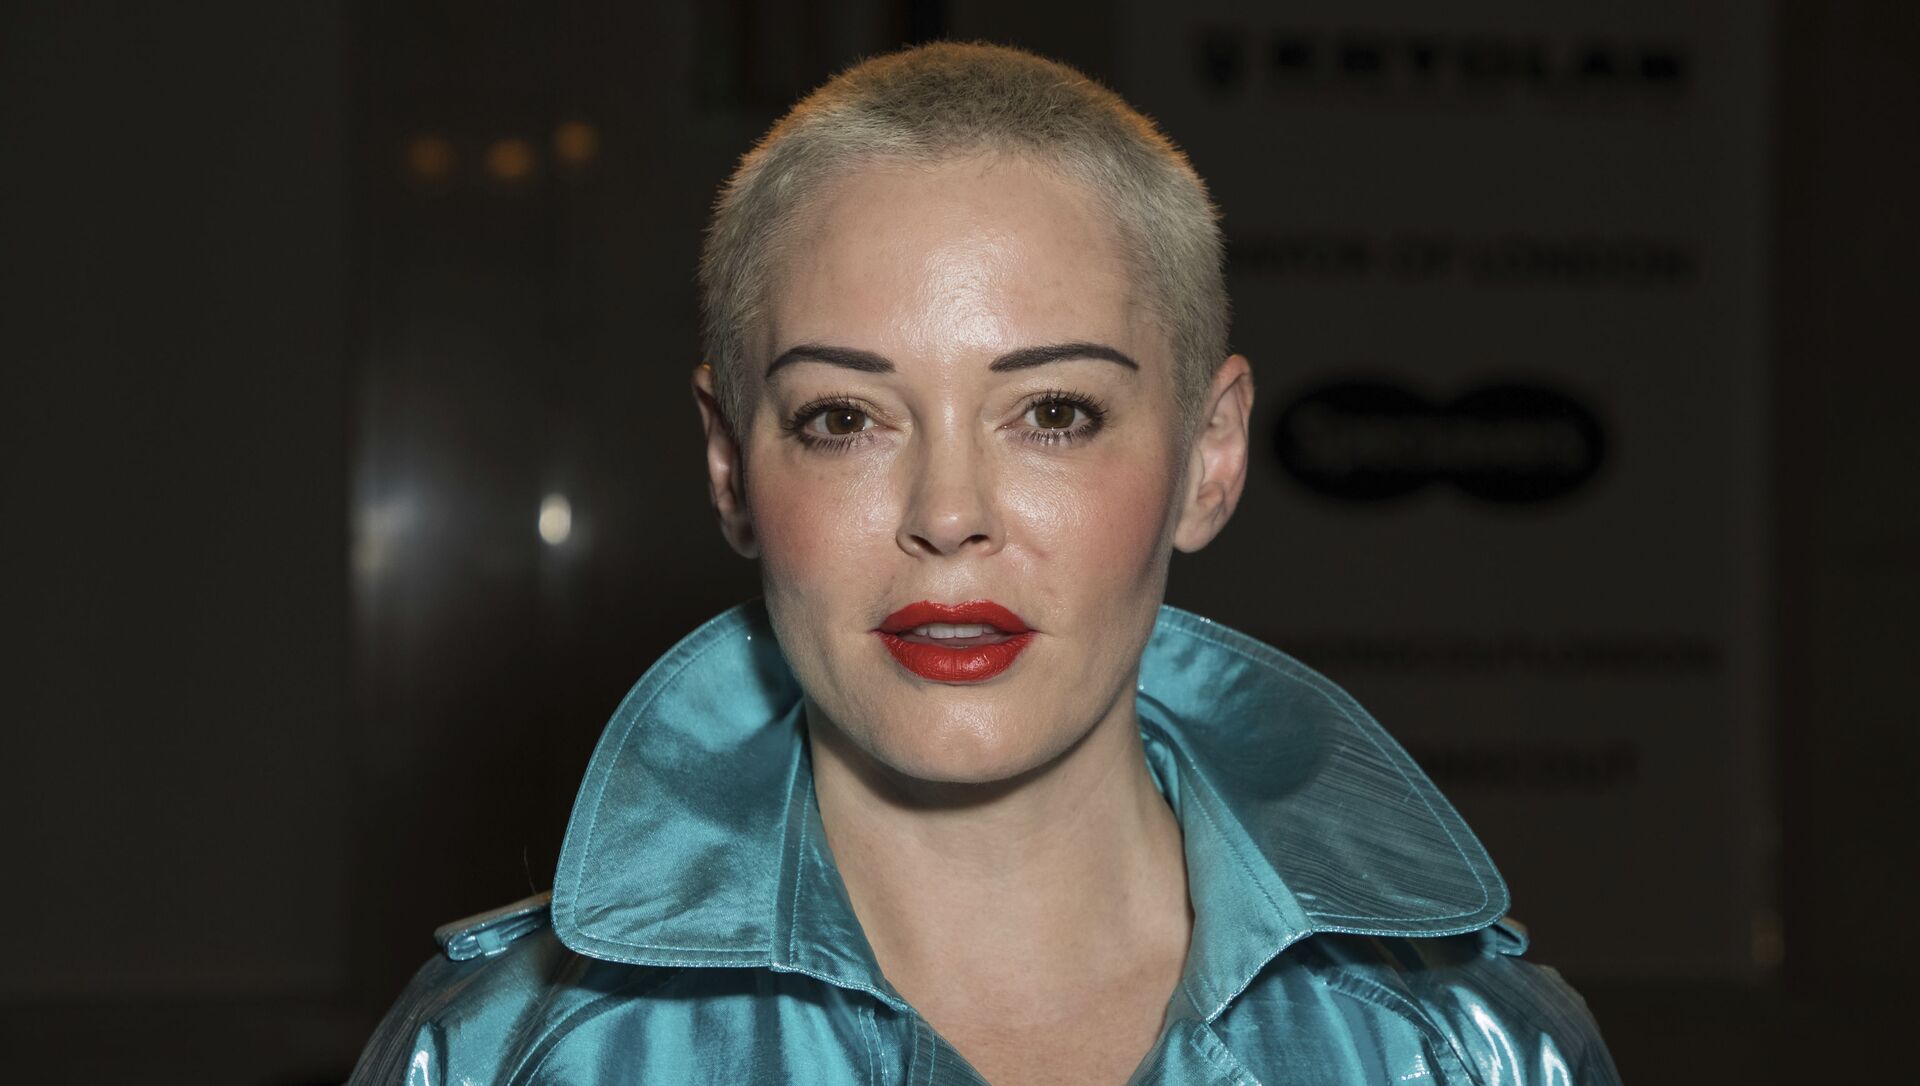 Actress Rose McGowan poses for photographers prior to the Pam Hogg Spring/Summer 2019 runway show at London Fashion Week in London, Friday, Sept. 14, 2018 - Sputnik International, 1920, 01.09.2021